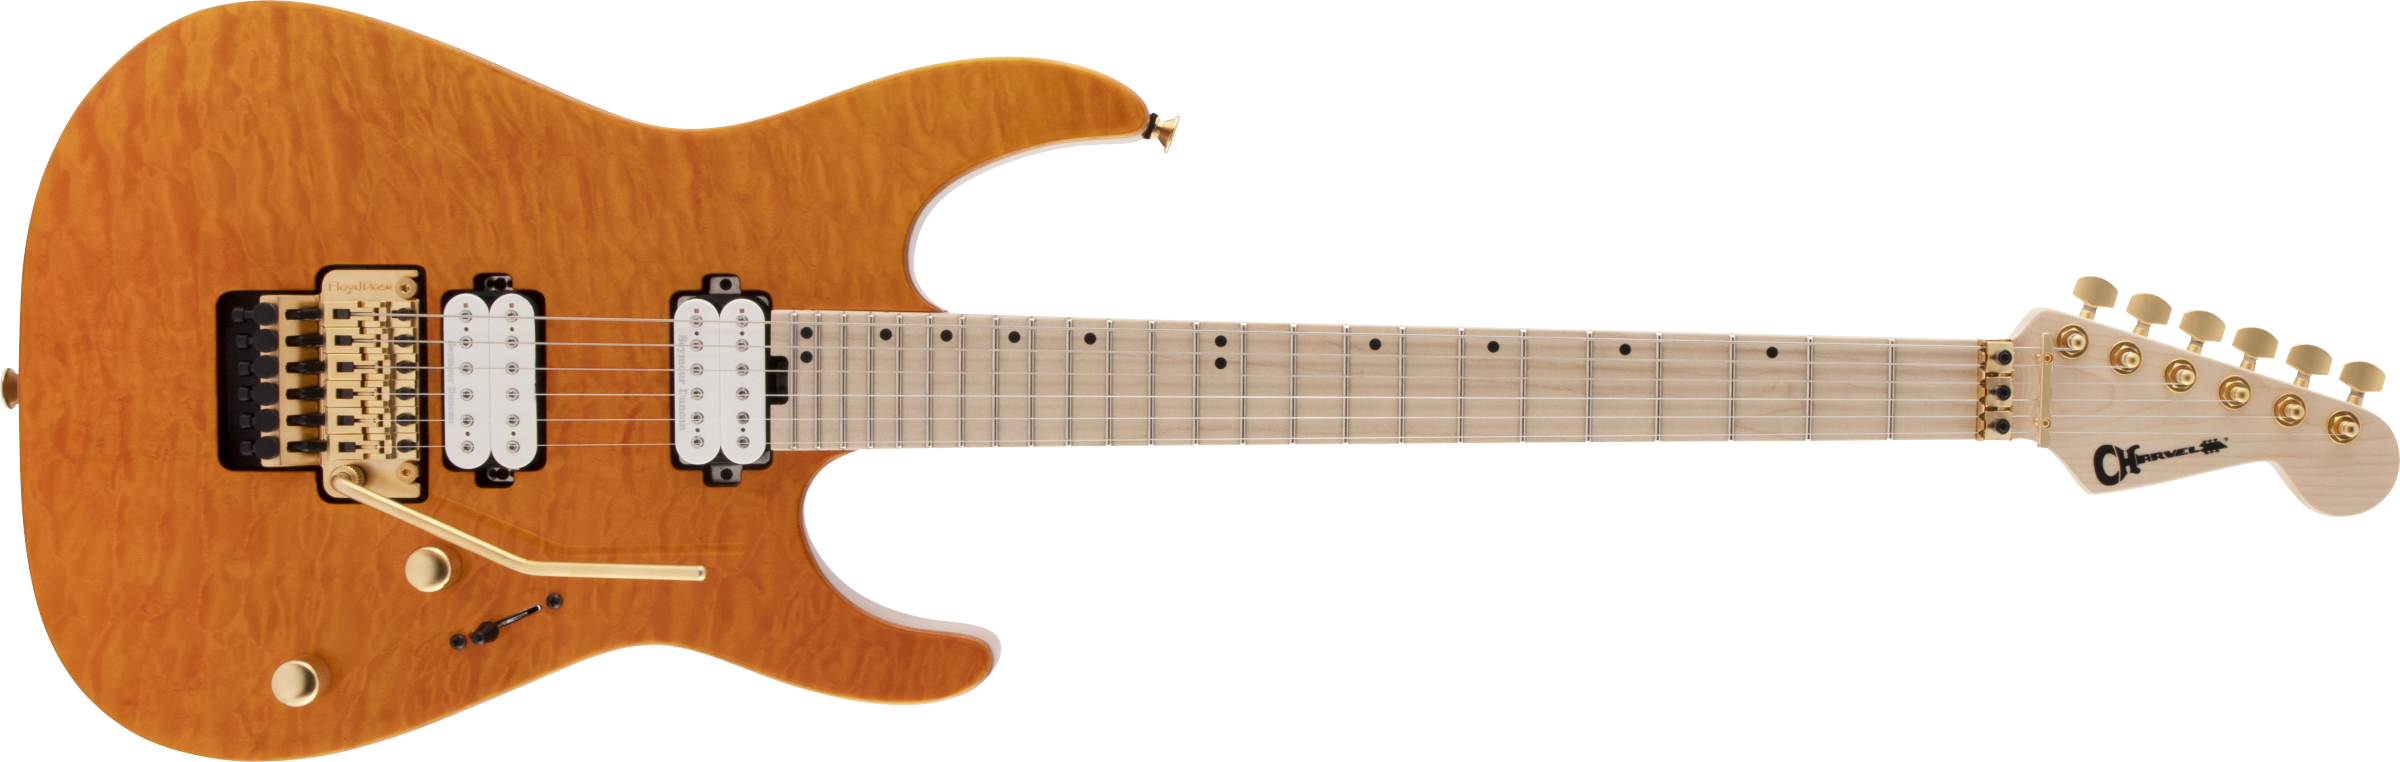 Charvel Pro-Mod DK24 HH FR M Mahogany with Quilt Maple Maple Fingerboard Dark Amber 2969431558